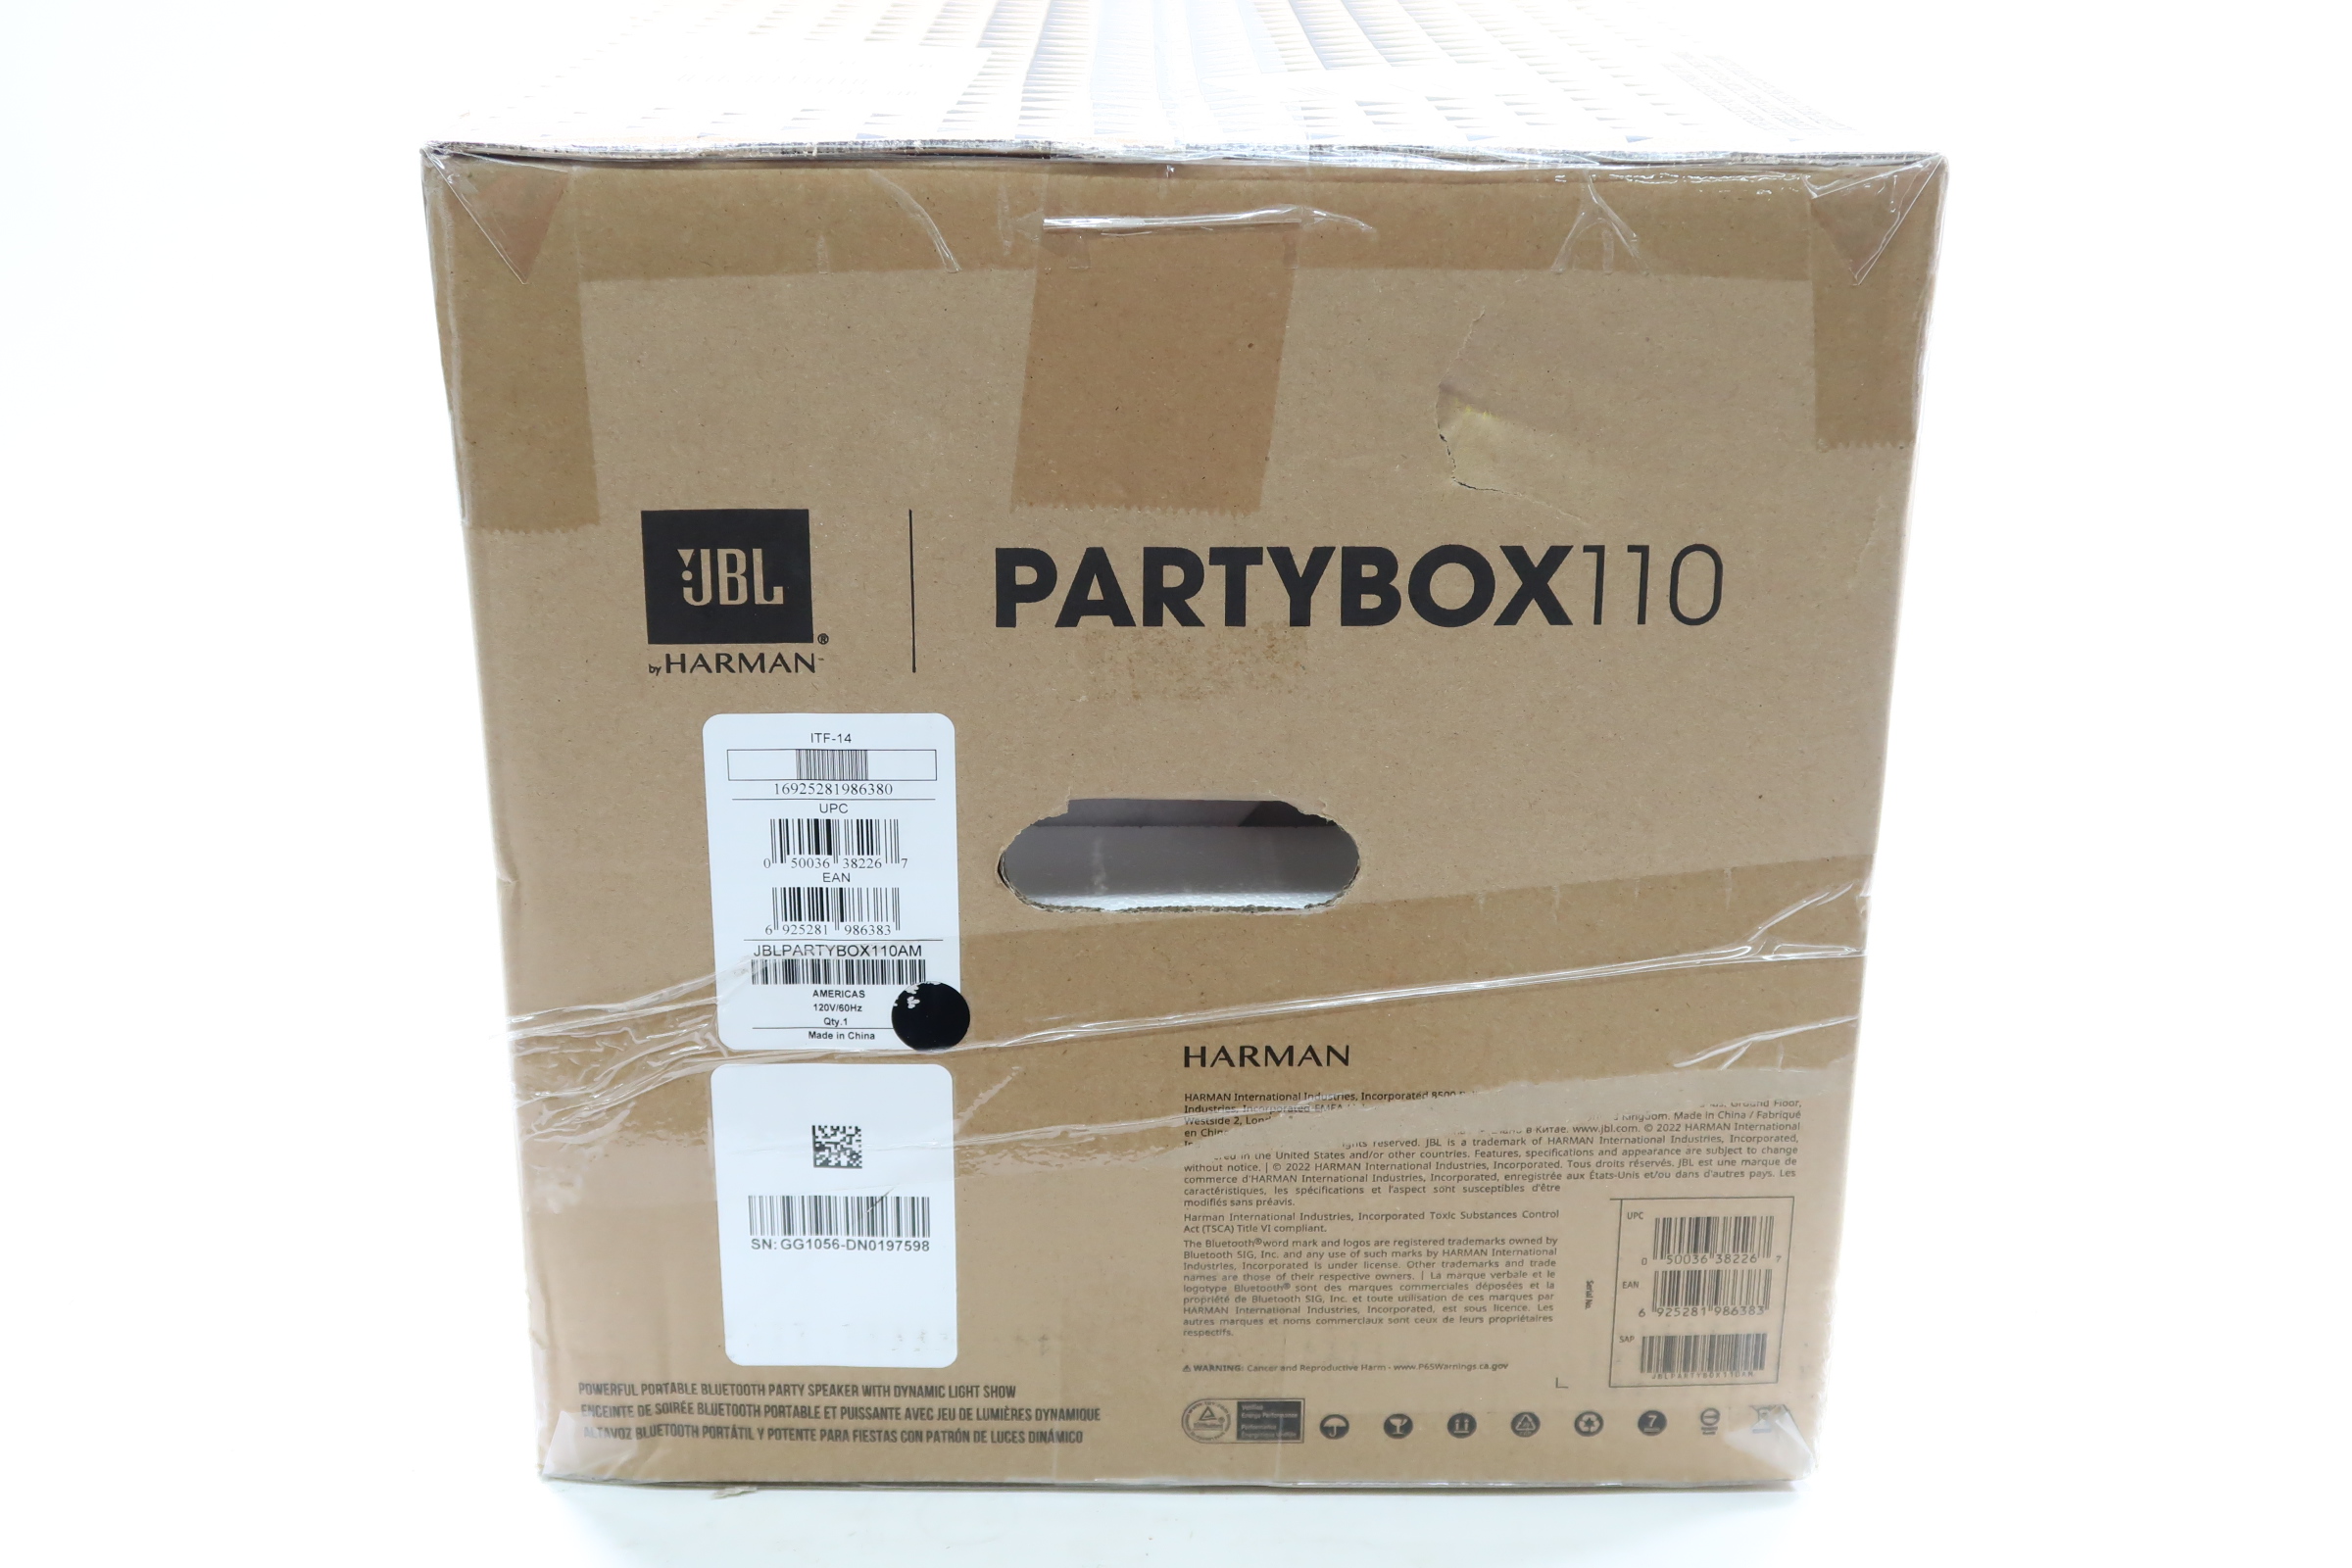  JBL PartyBox 110-160W Portable Wireless Party Speaker -  Powerful Sound and deep bass (JBLPARTYBOX110AM) + AUX Cable + Microfiber  Cloth : Electronics